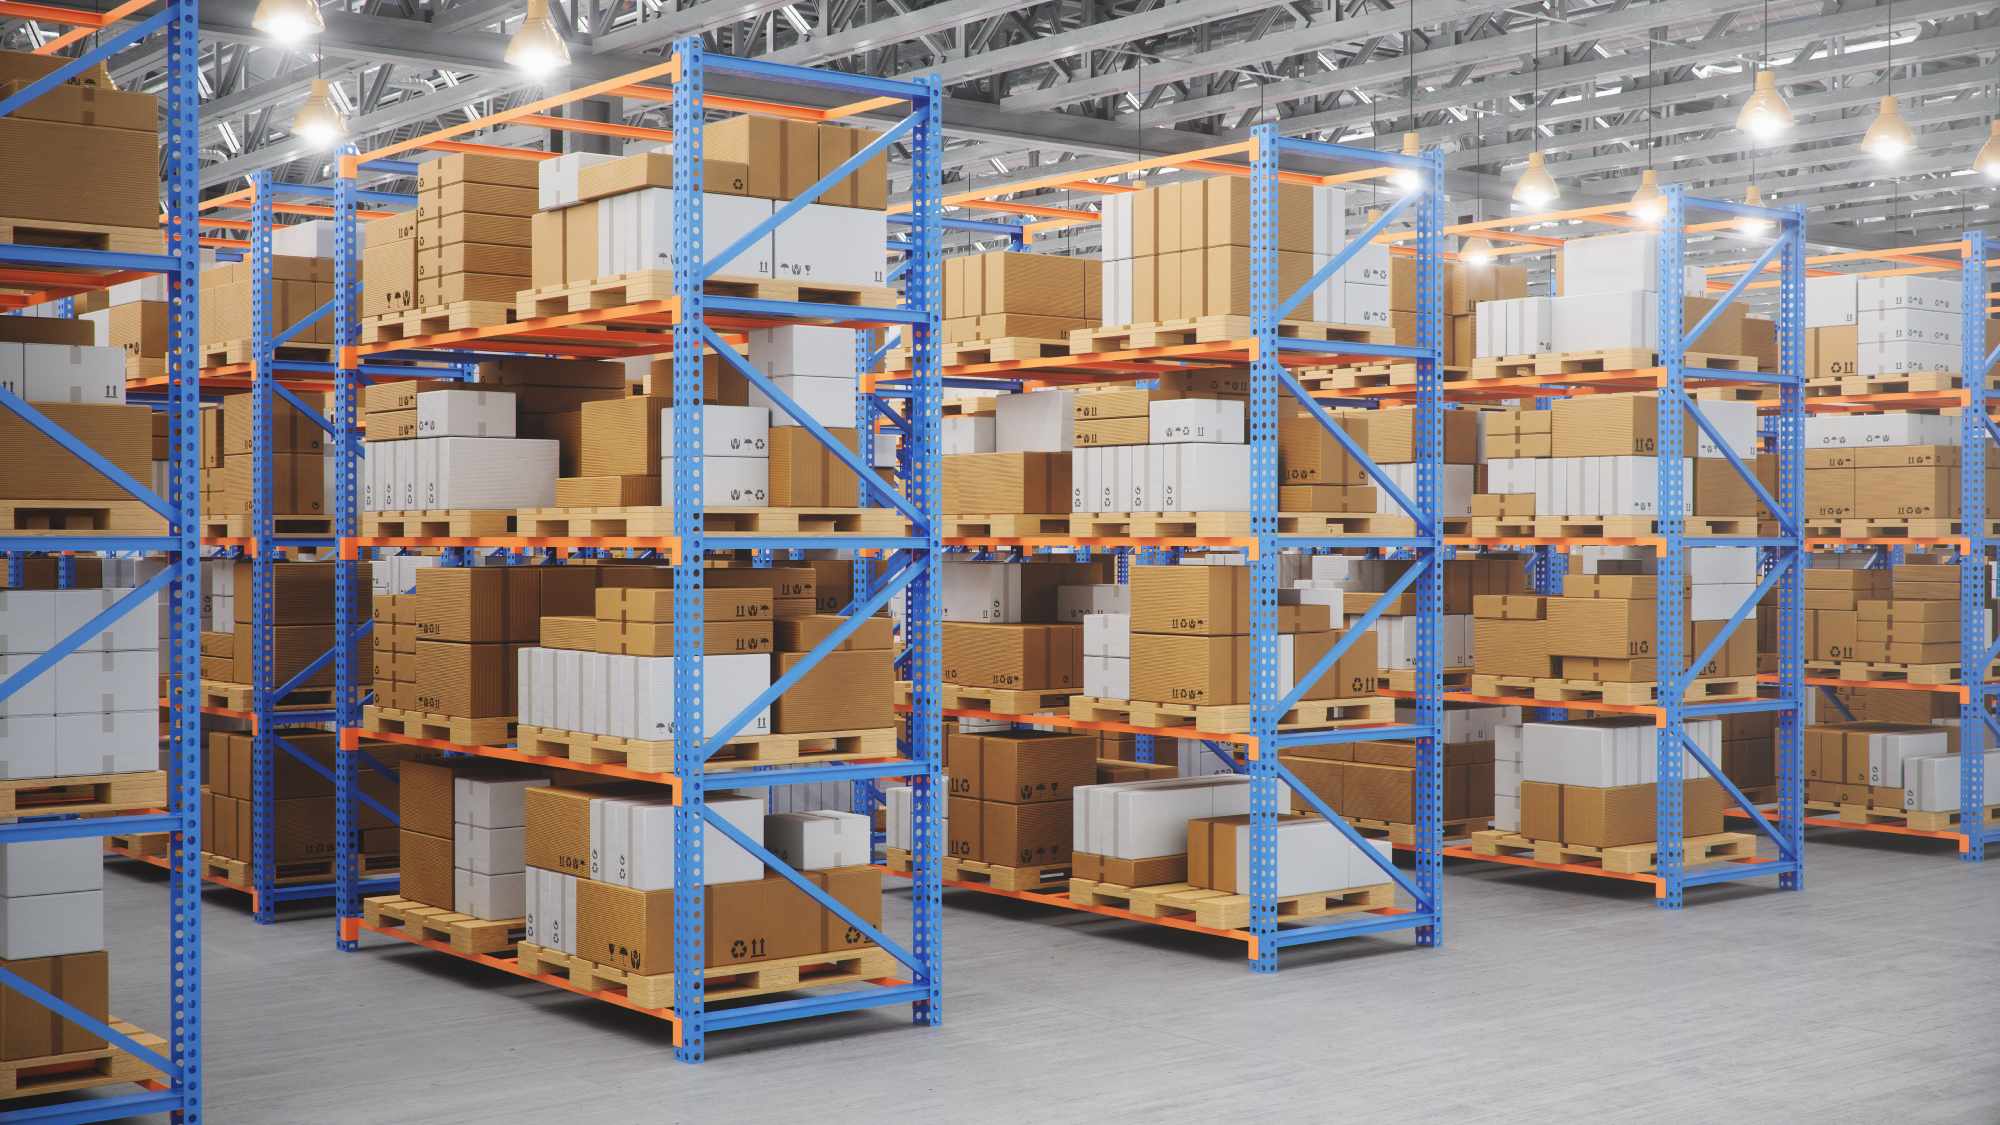 Warehouse with cardboard boxes inside on pallets racks, logistic center. Huge, large modern warehouse. Warehouse filled with cardboard boxes on shelves, boxes stand on pallets